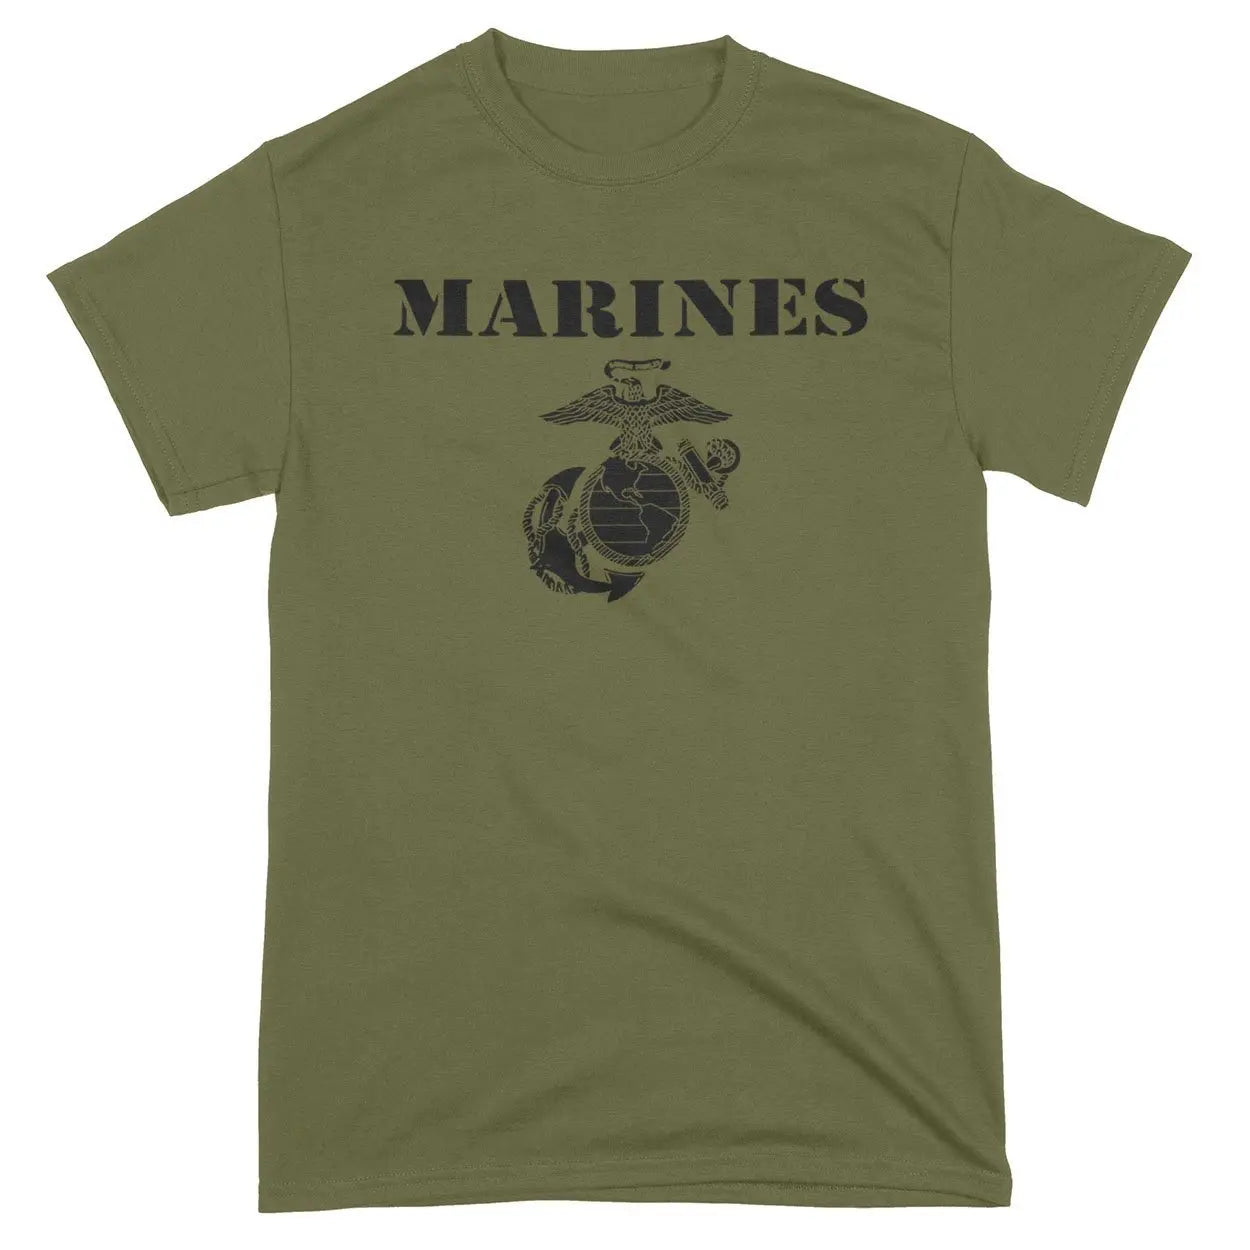 Official Marine Corps Merchandise